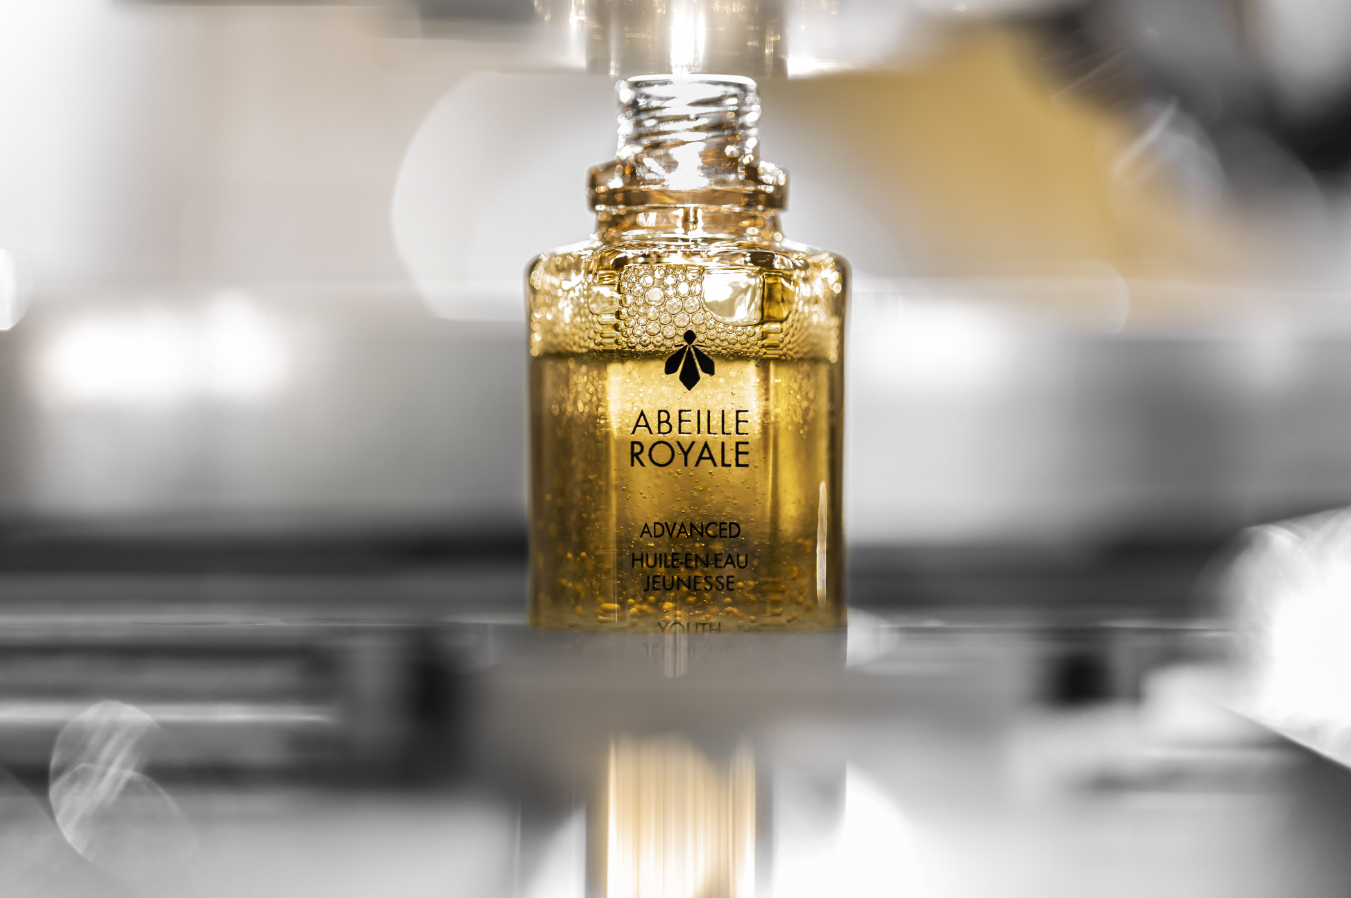 Cosmetics and fragrance help lift LVMH sales